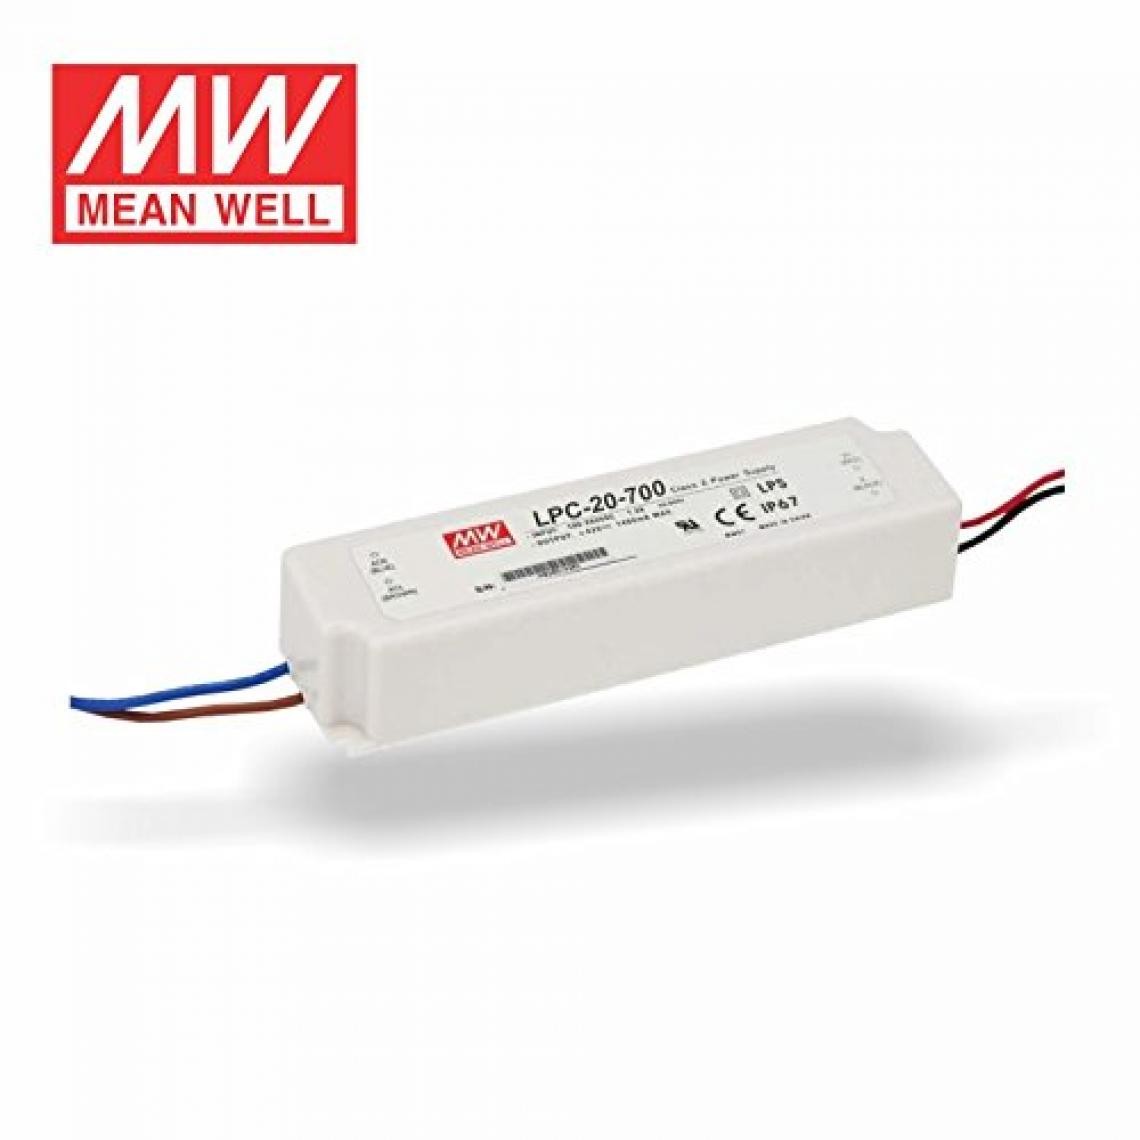 Inconnu - Driver LED Mean Well LPC-20-700 9-30 V/DC 700 mA - Boitier PC